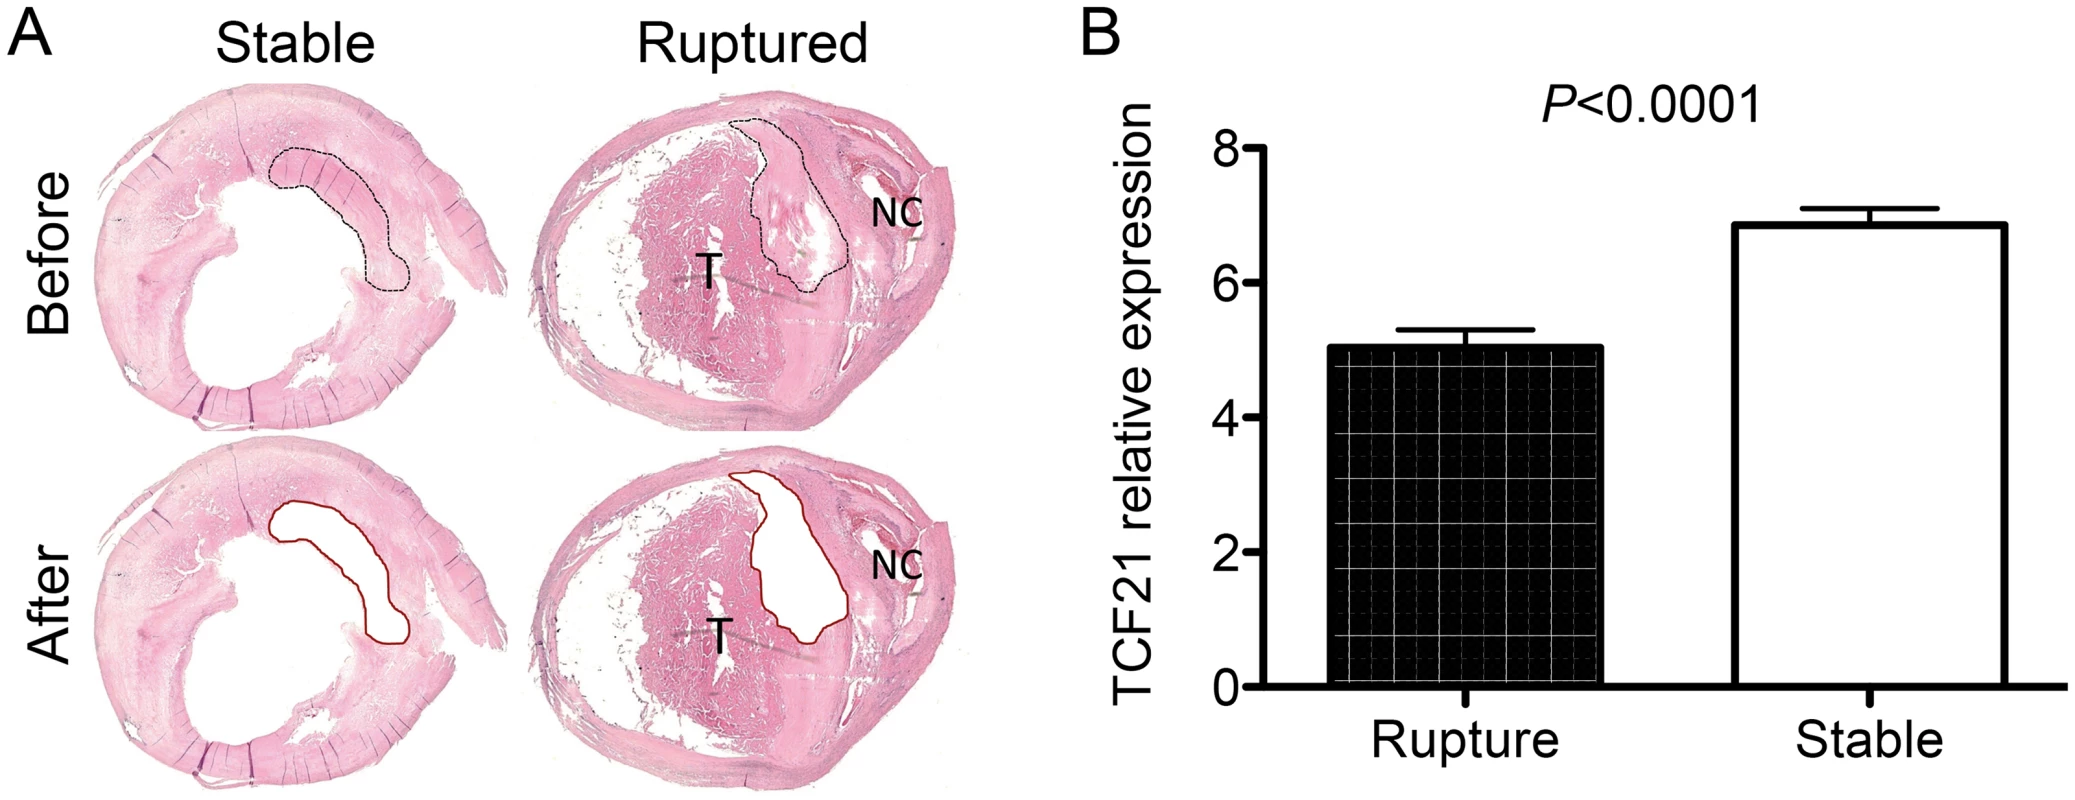 Differential <i>TCF21</i> gene expression in fibrous cap of stable vs. ruptured atherosclerotic plaque.